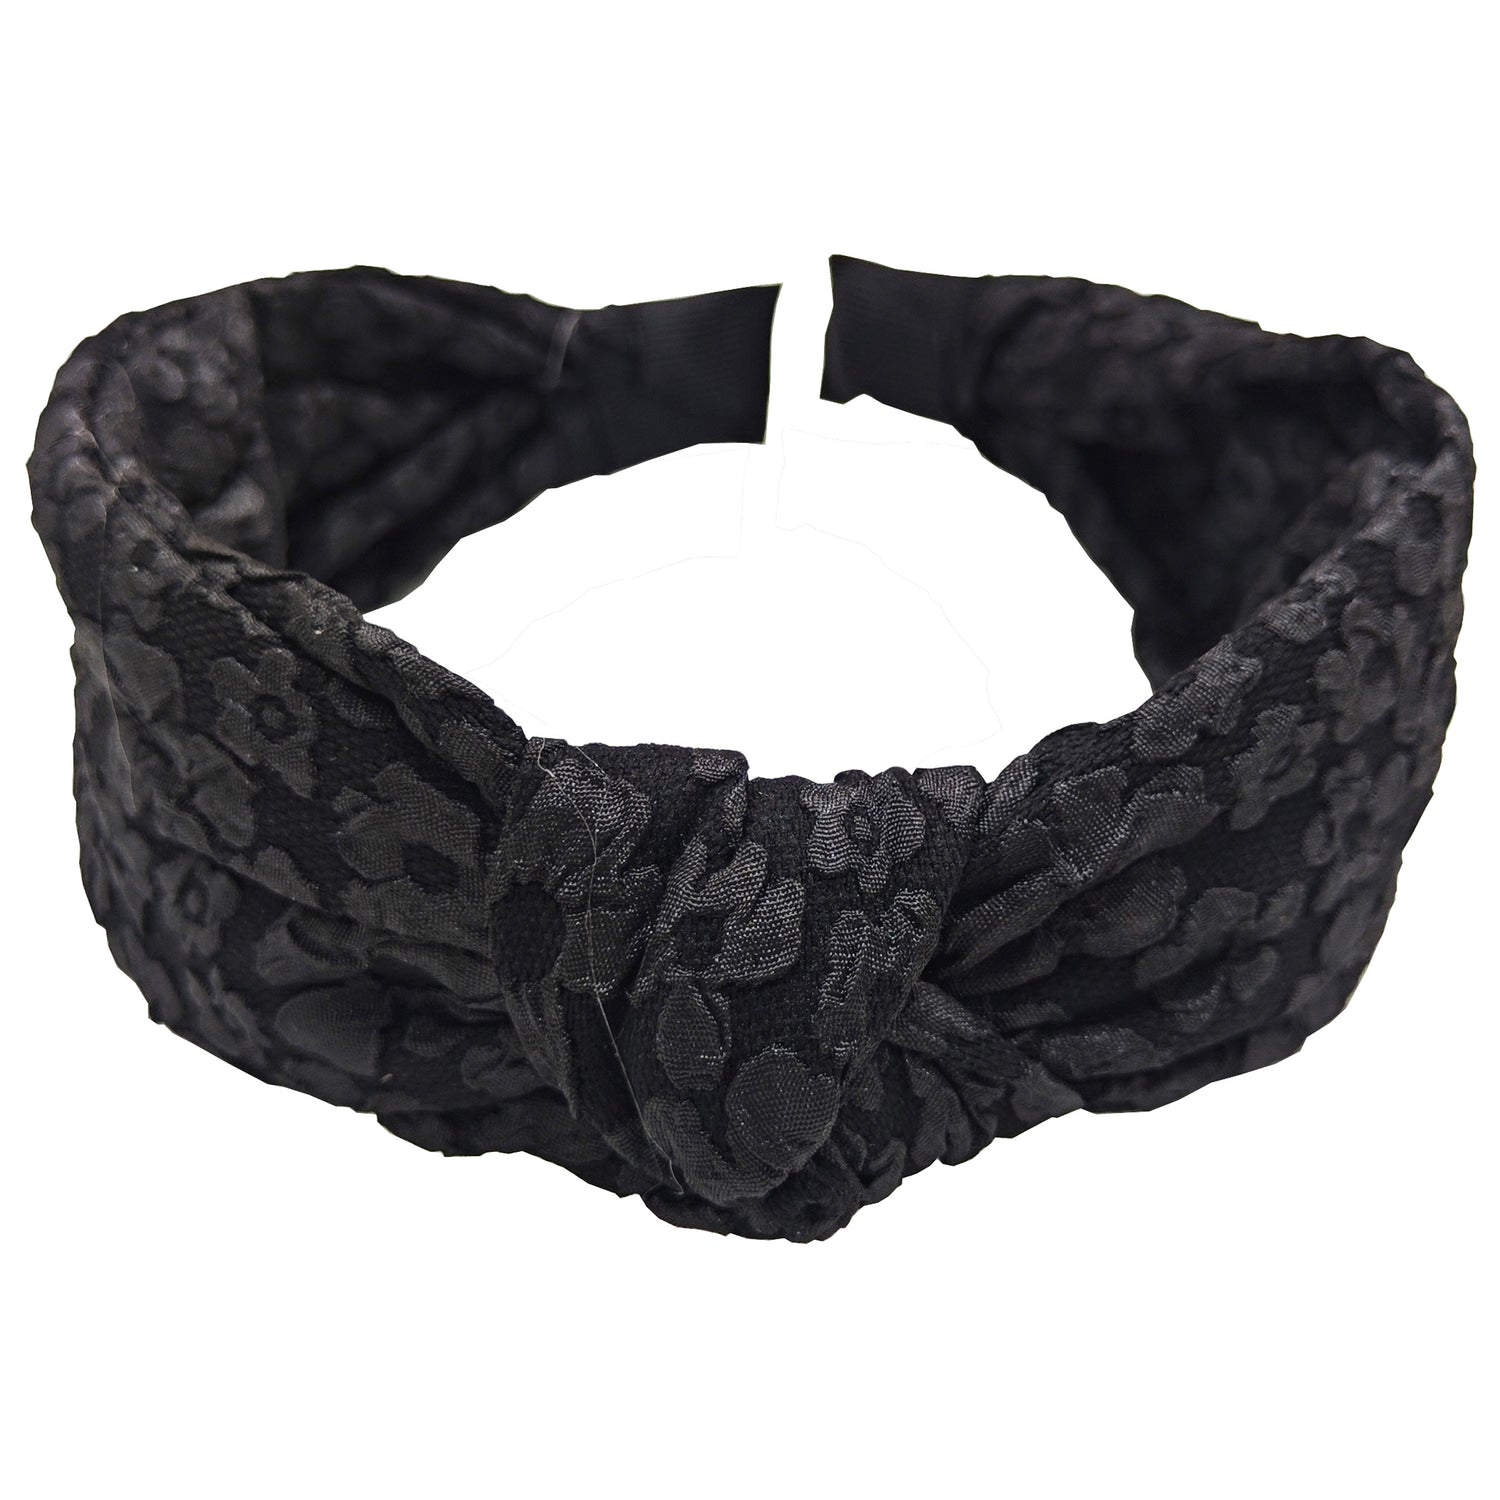 Flower pressed knot top hairband black